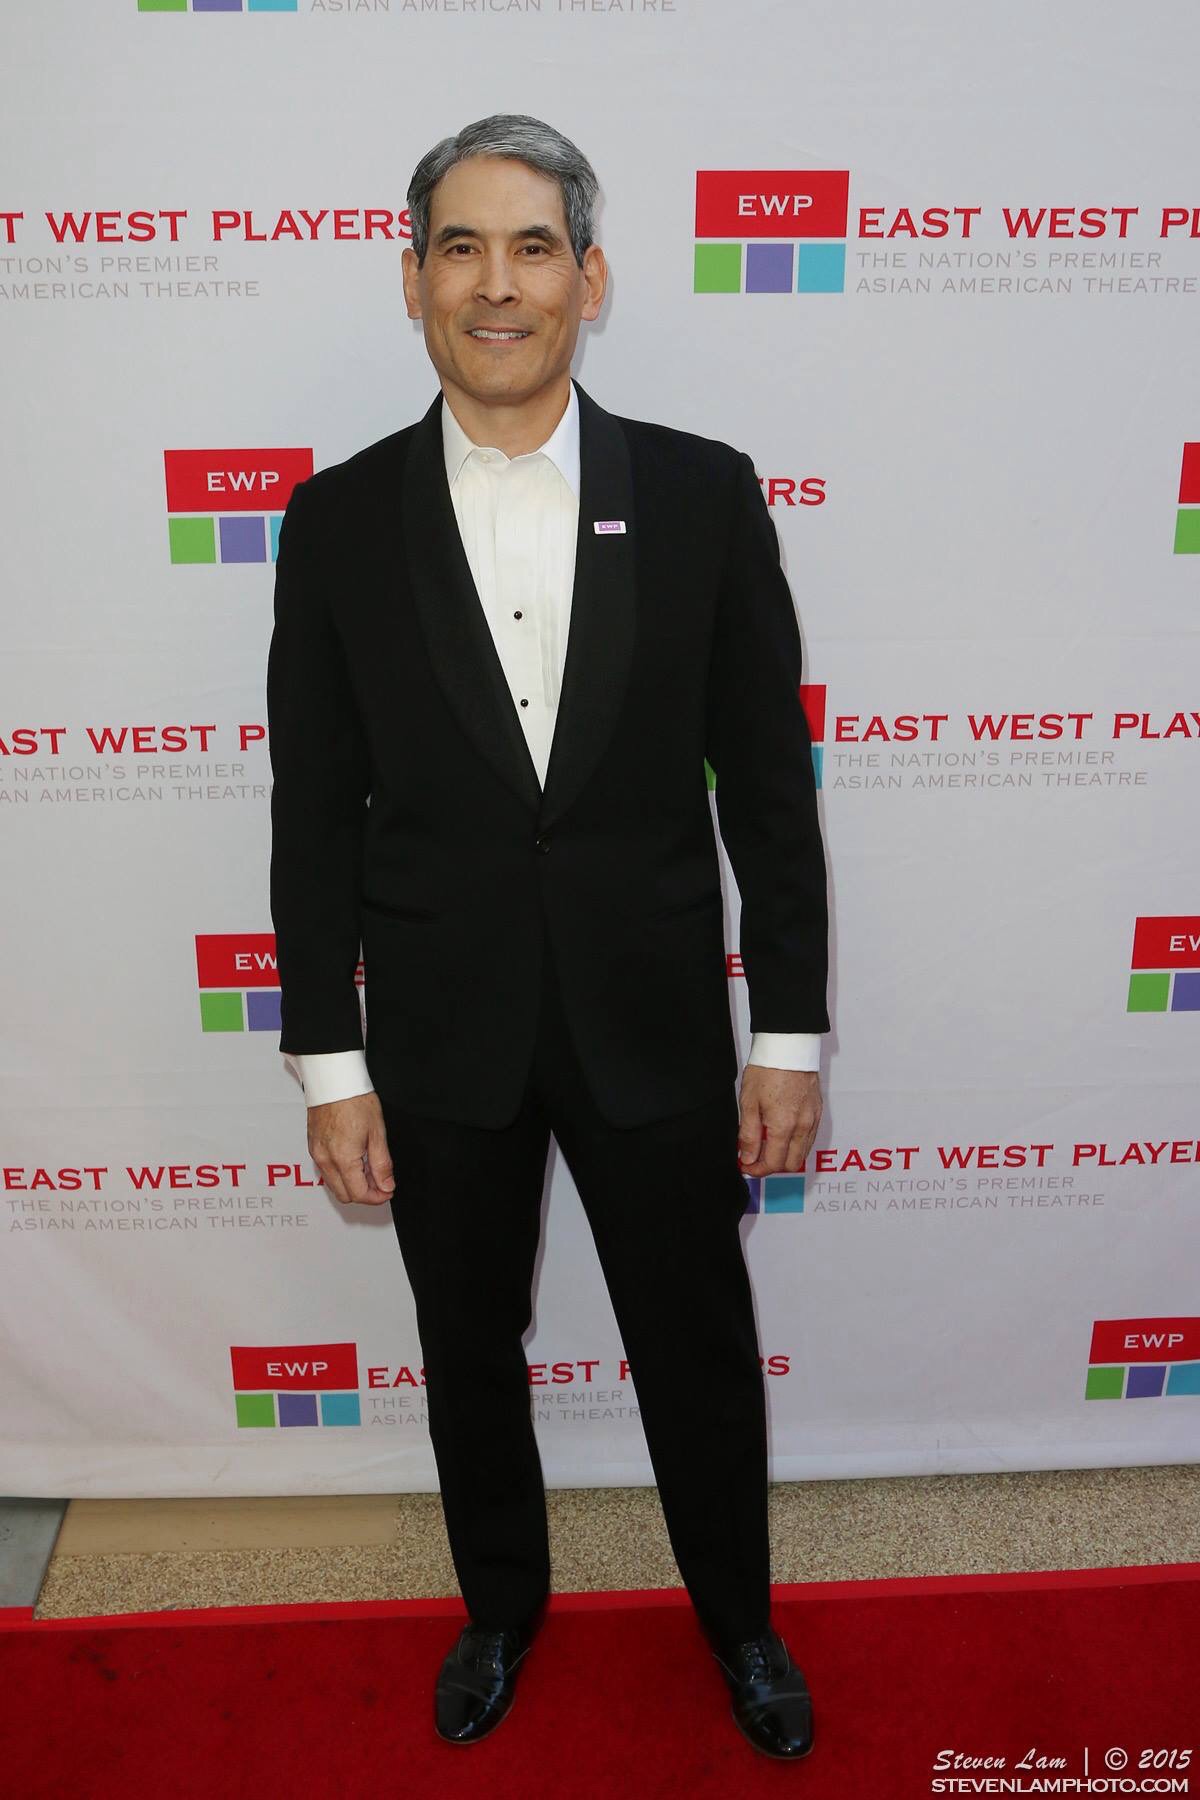 East West Players Golden Anniversary Visionary Awards - April 20, 2015; Universal Hilton, Universal City CA